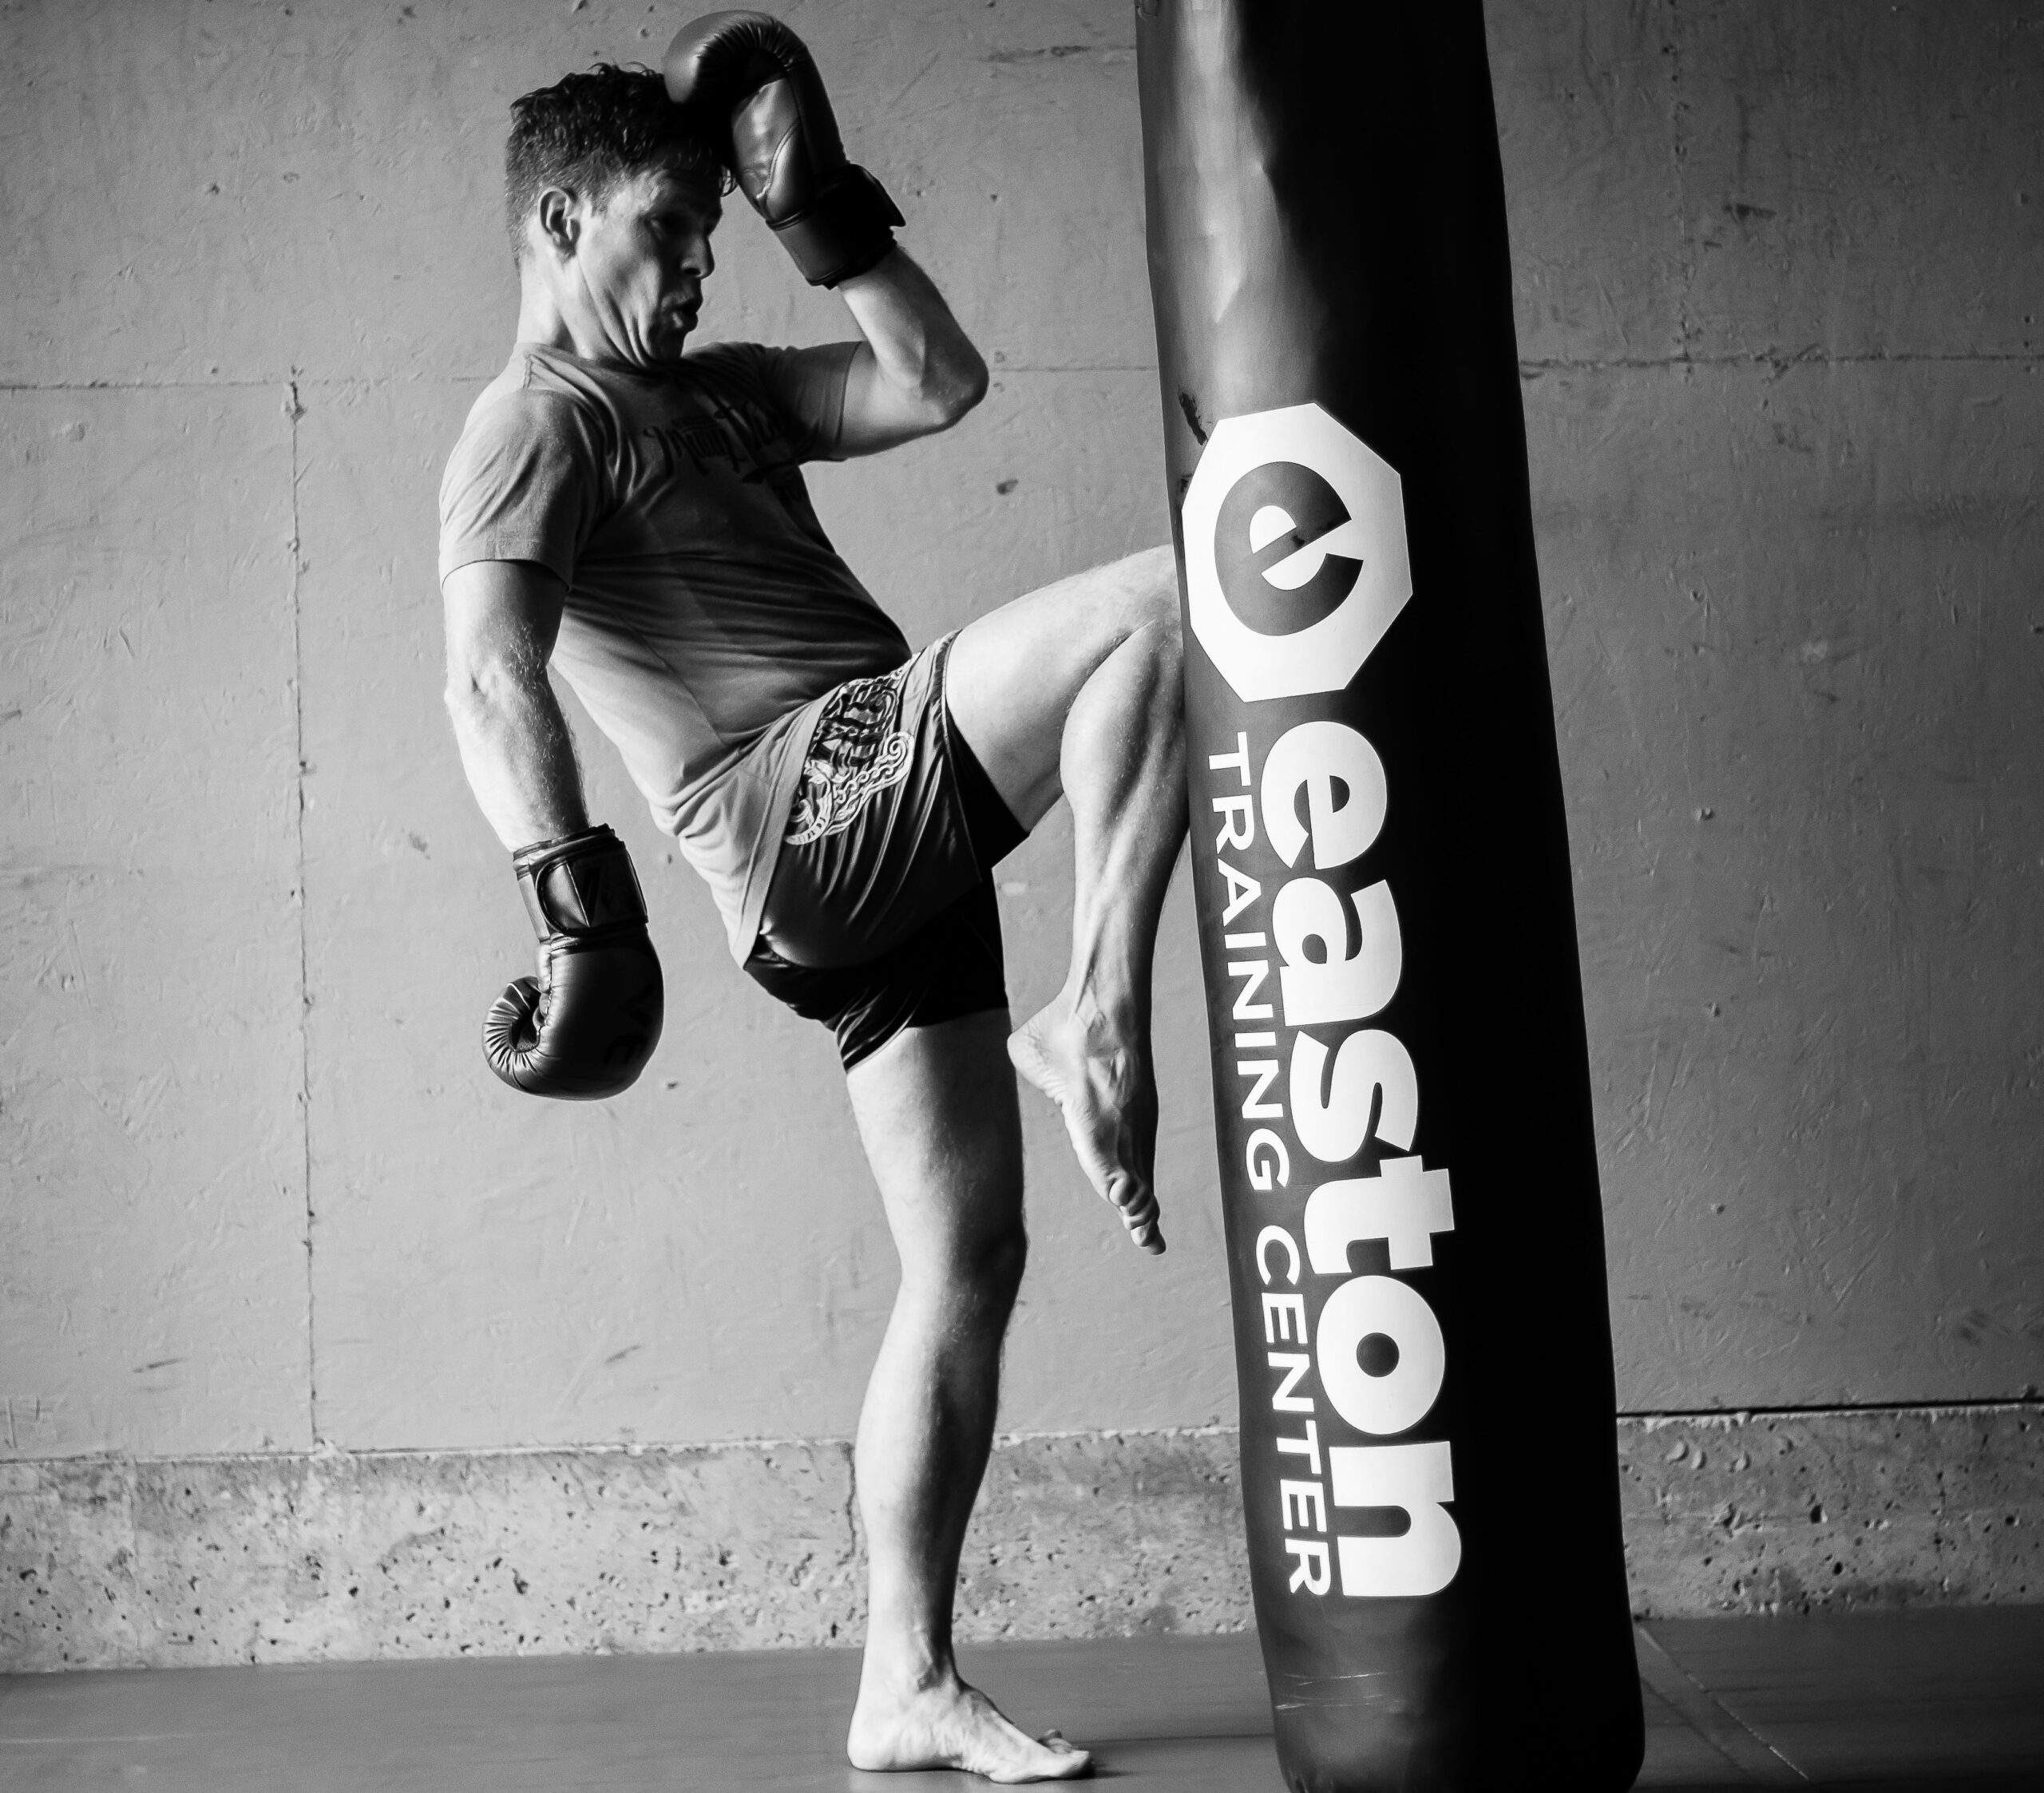 a man knees a punching bag labeled with the words "Easton Training Center" in a kickboxing class